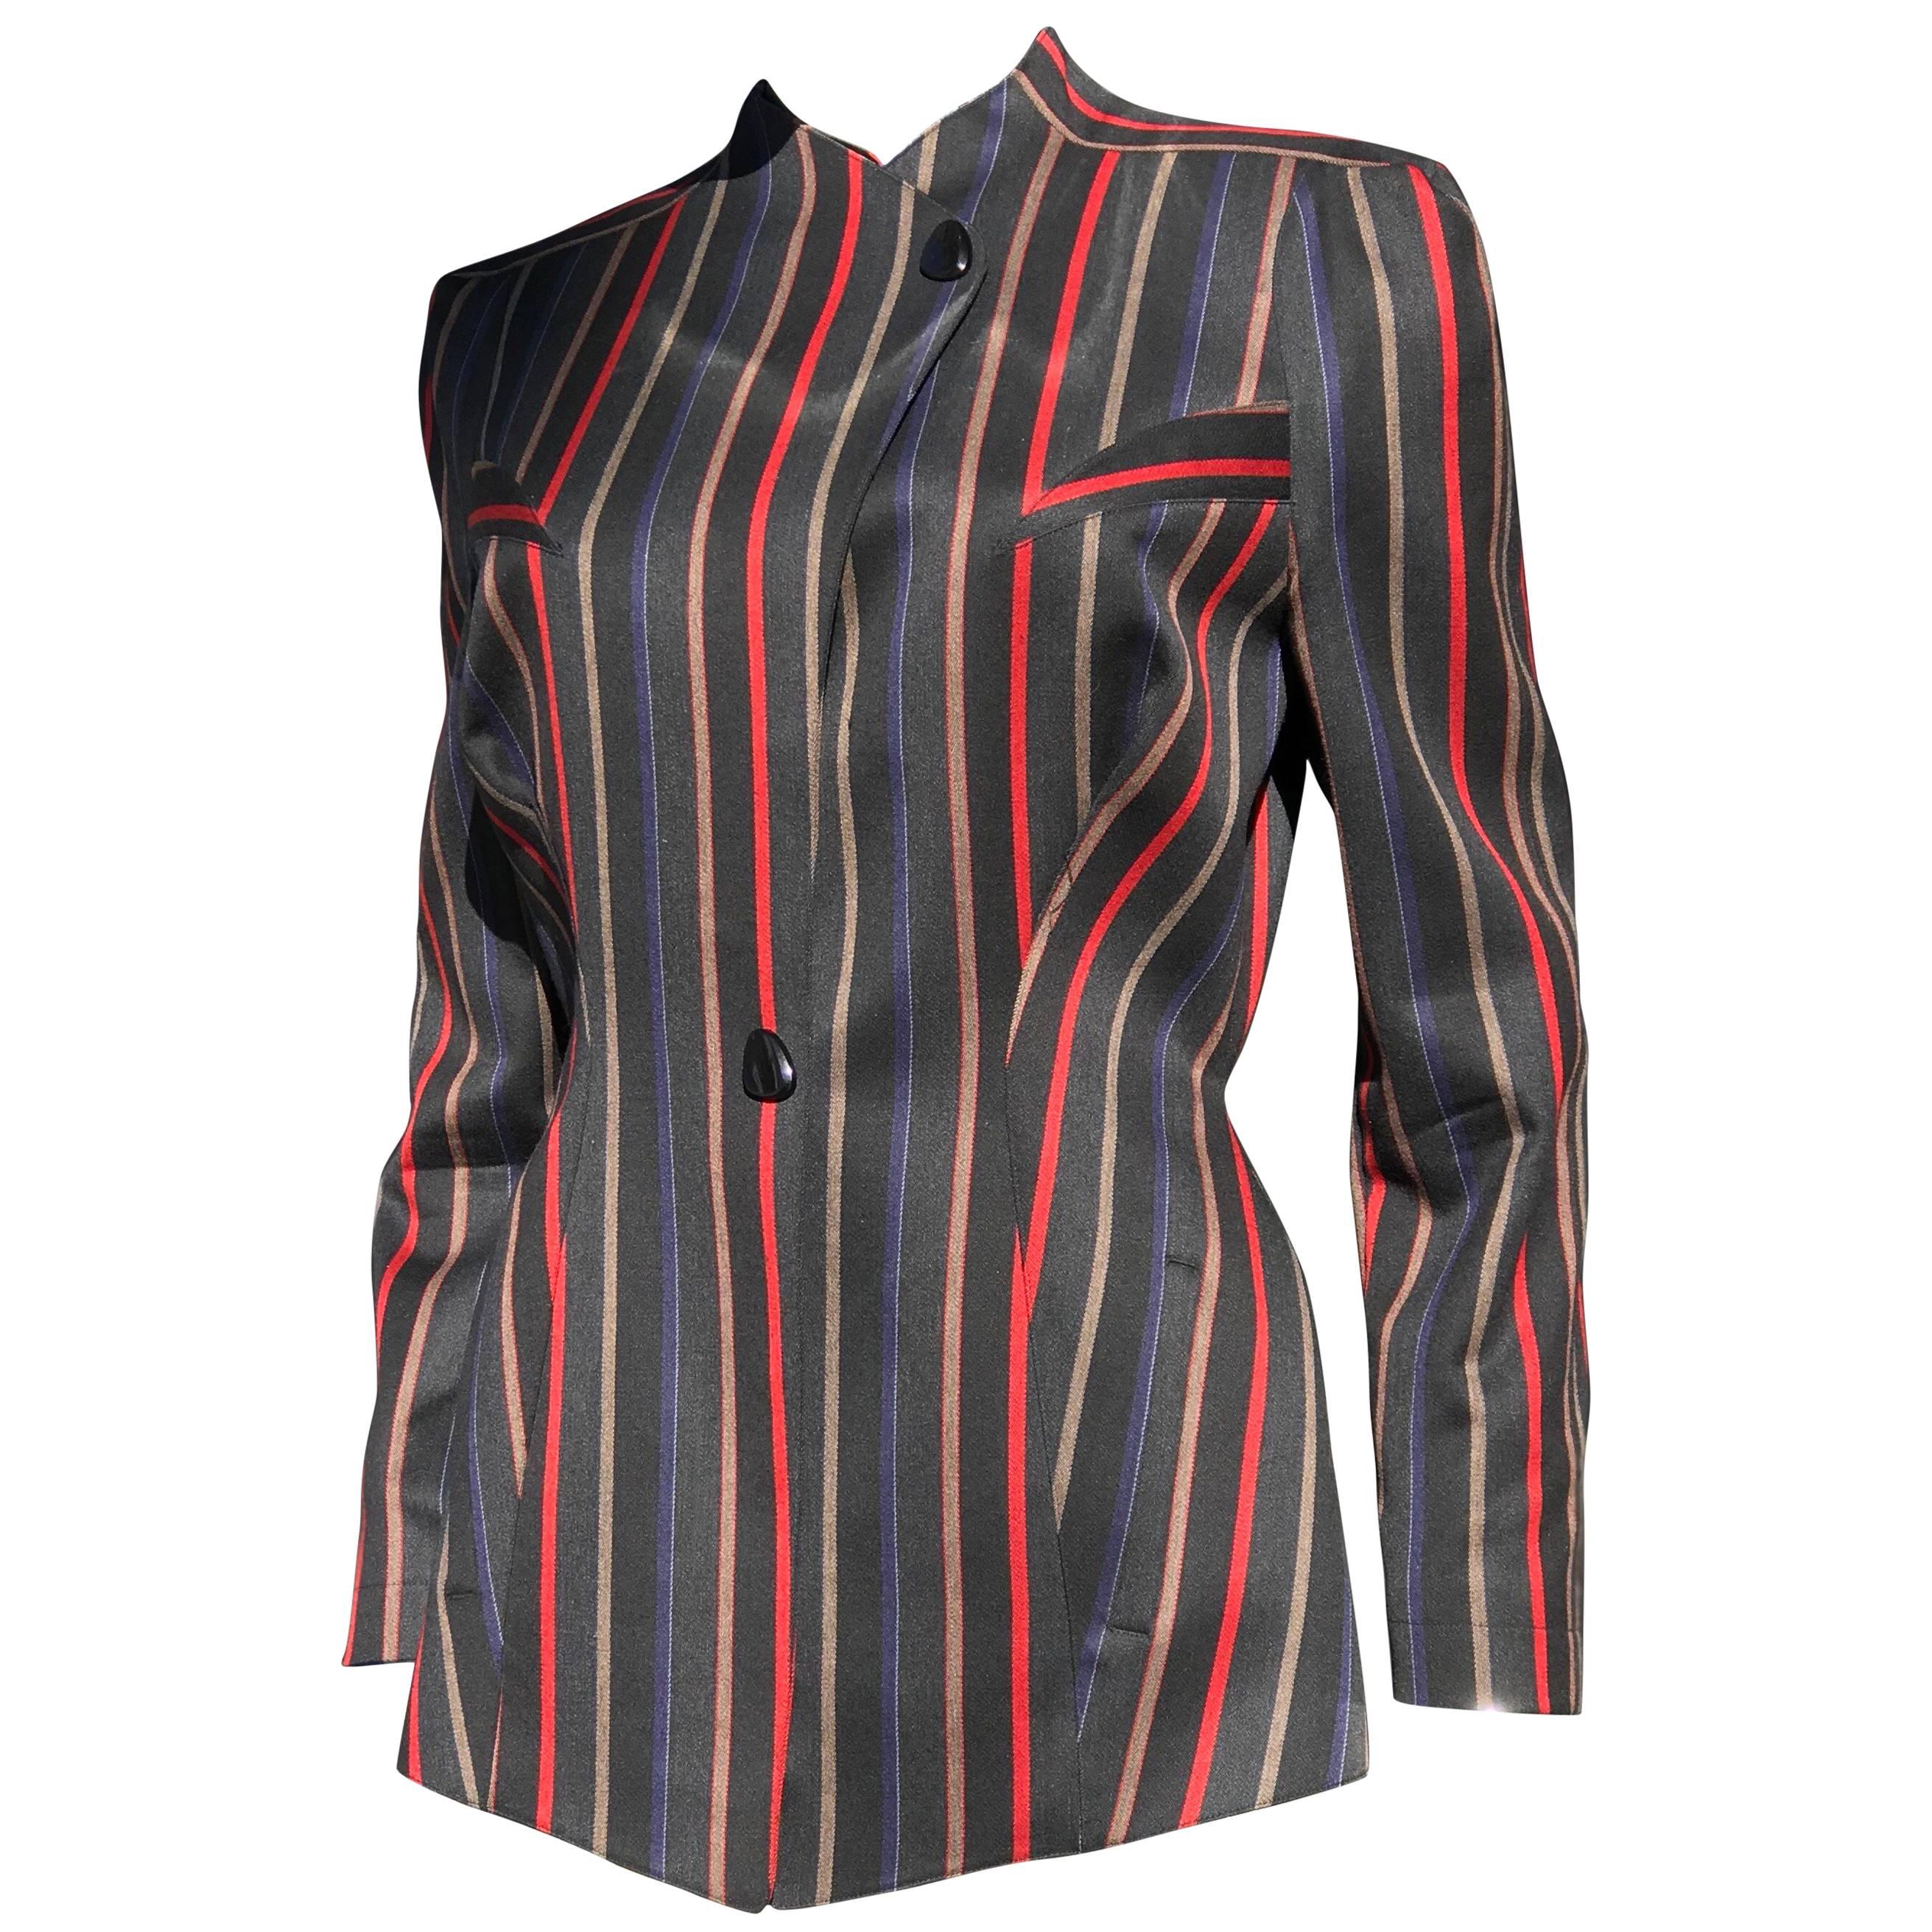 Vintage 1980s Thierry Mugler Asymmetrical Tailored Striped Jacket